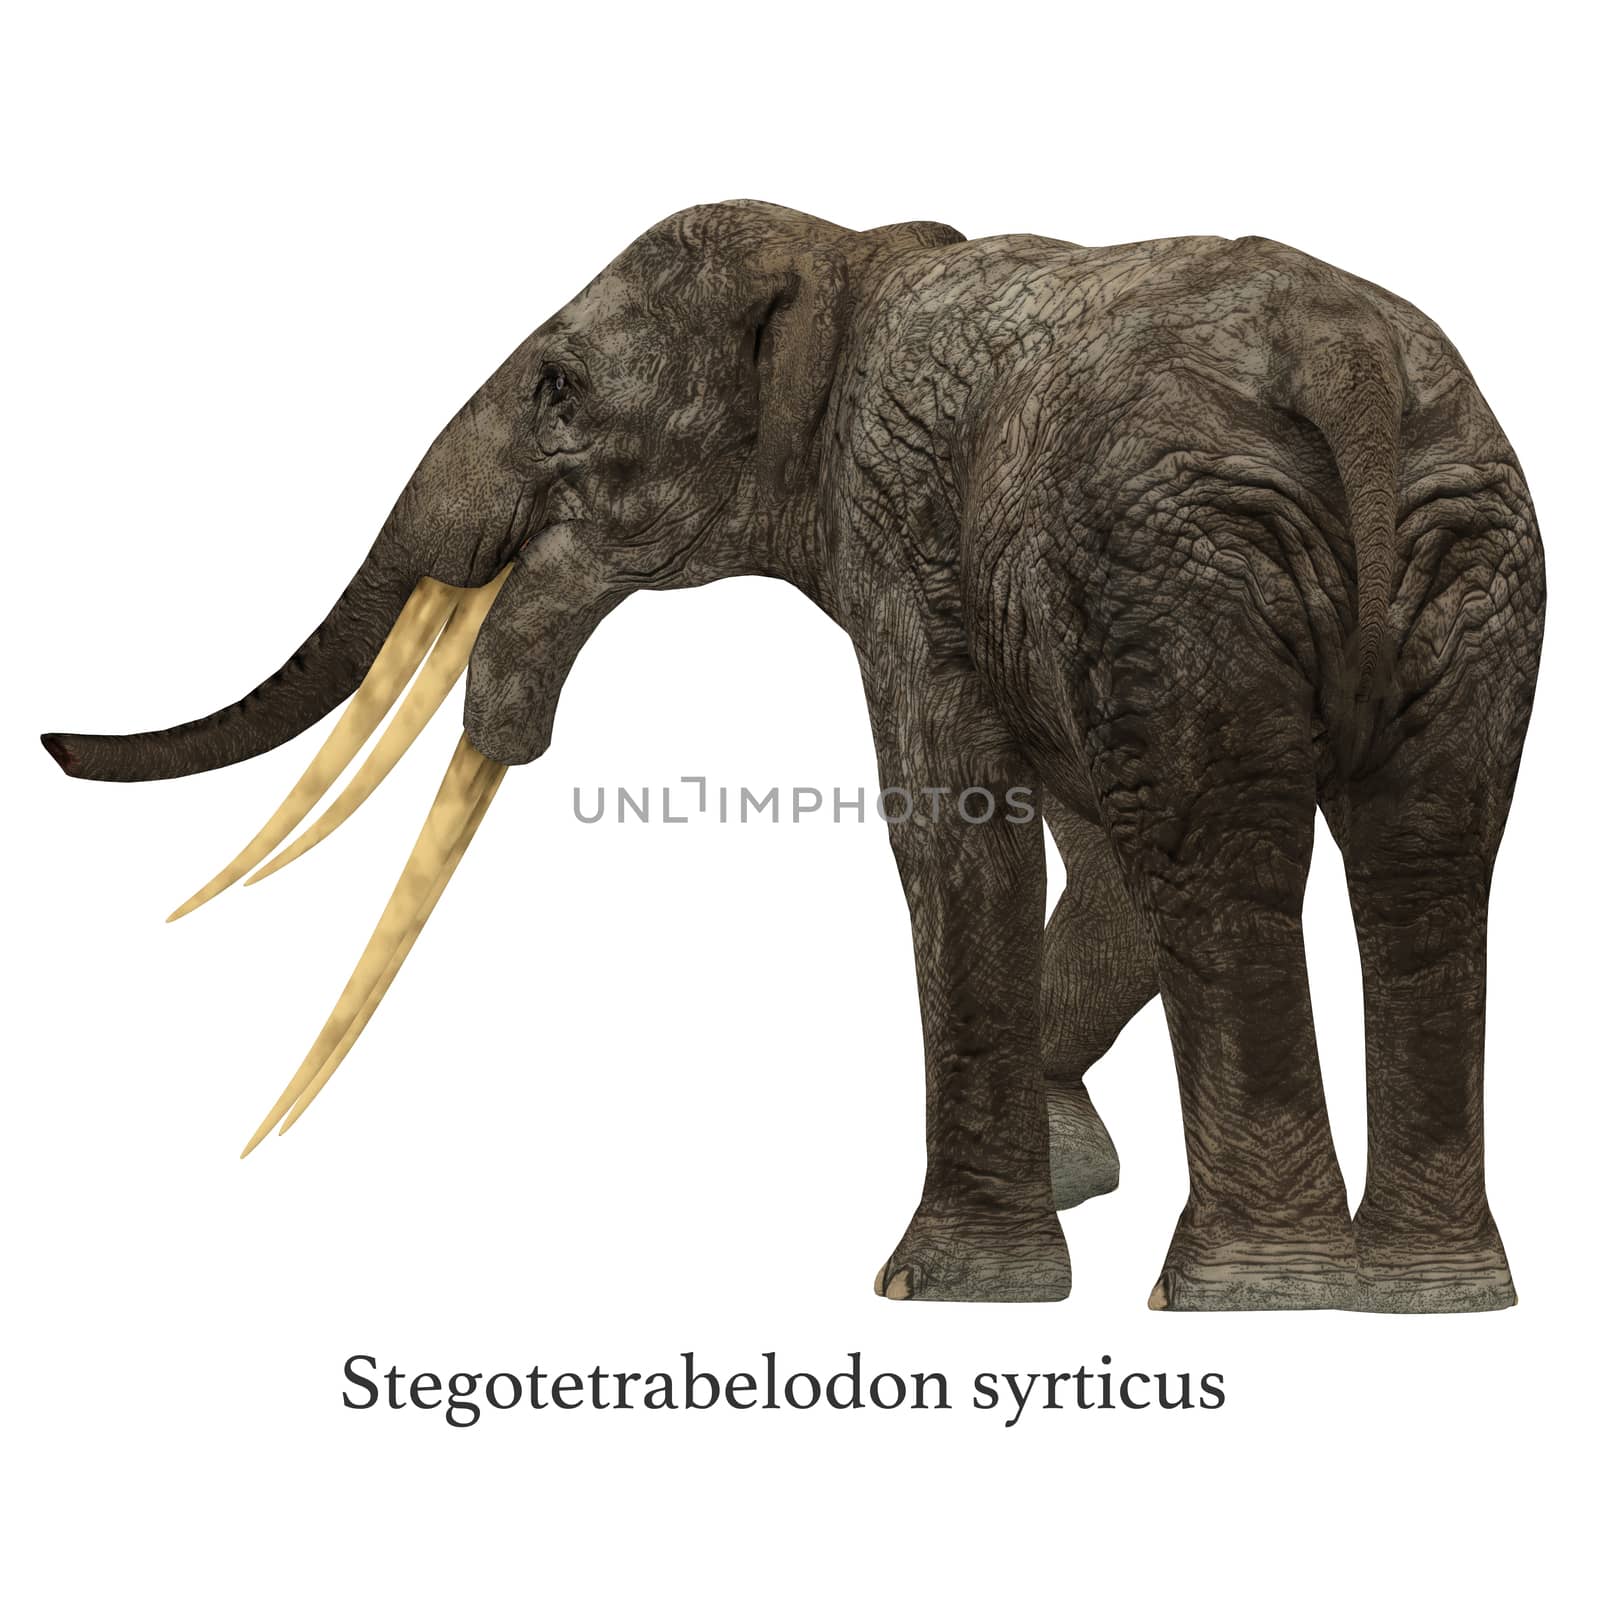 Stegotetrabelodon was an elephant that lived in the Miocene and Pliocene Periods of Africa and Eurasia.